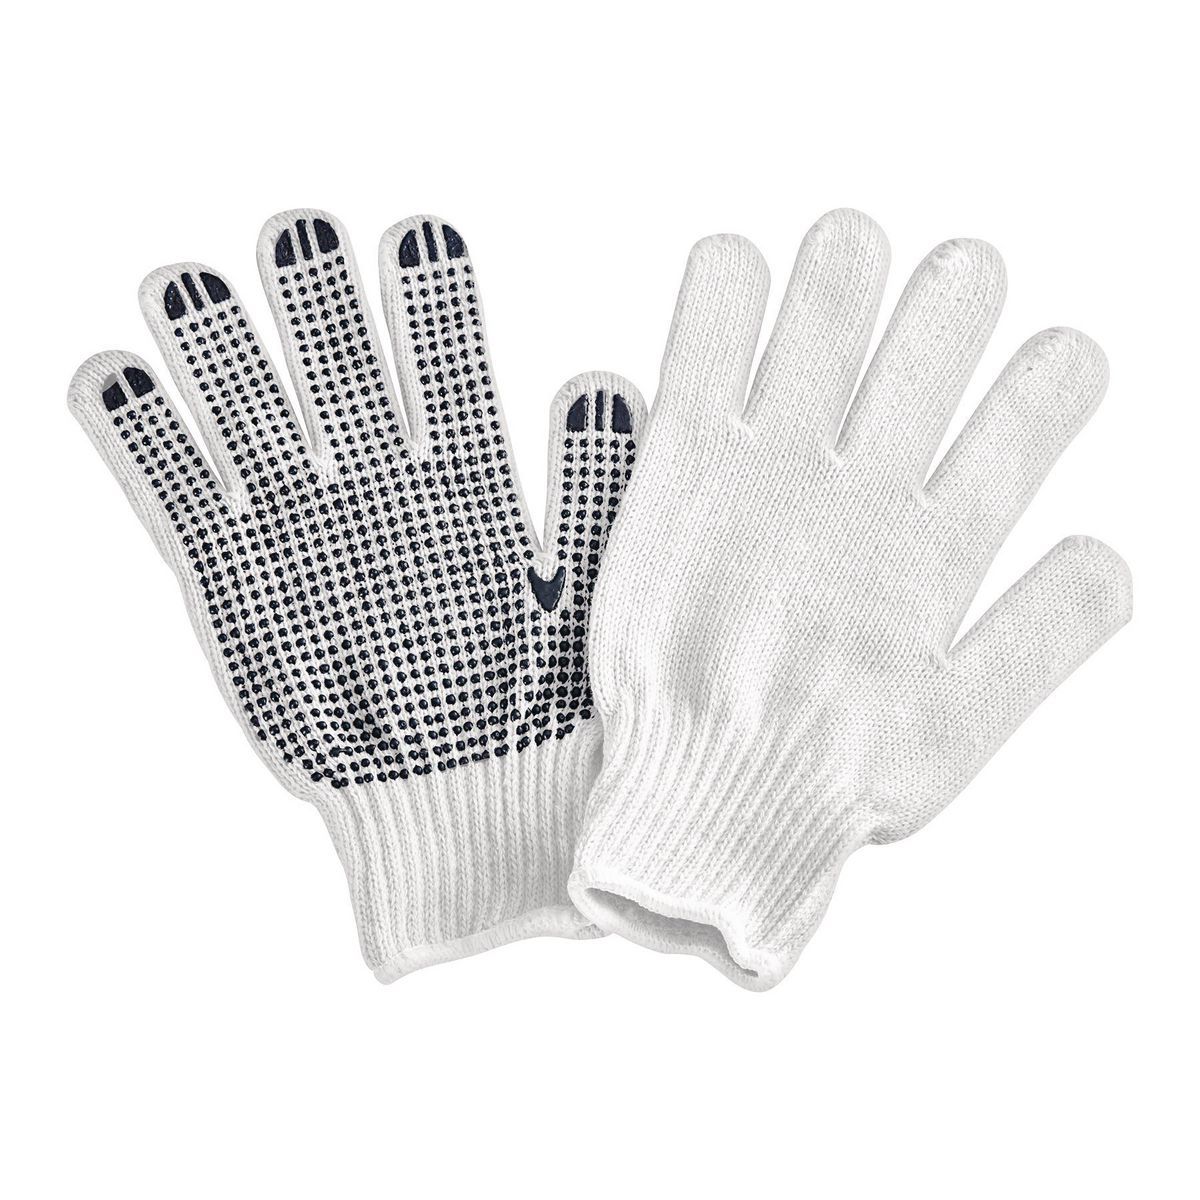 HARDY Cotton Work Gloves with PVC Dots, 6 Pair